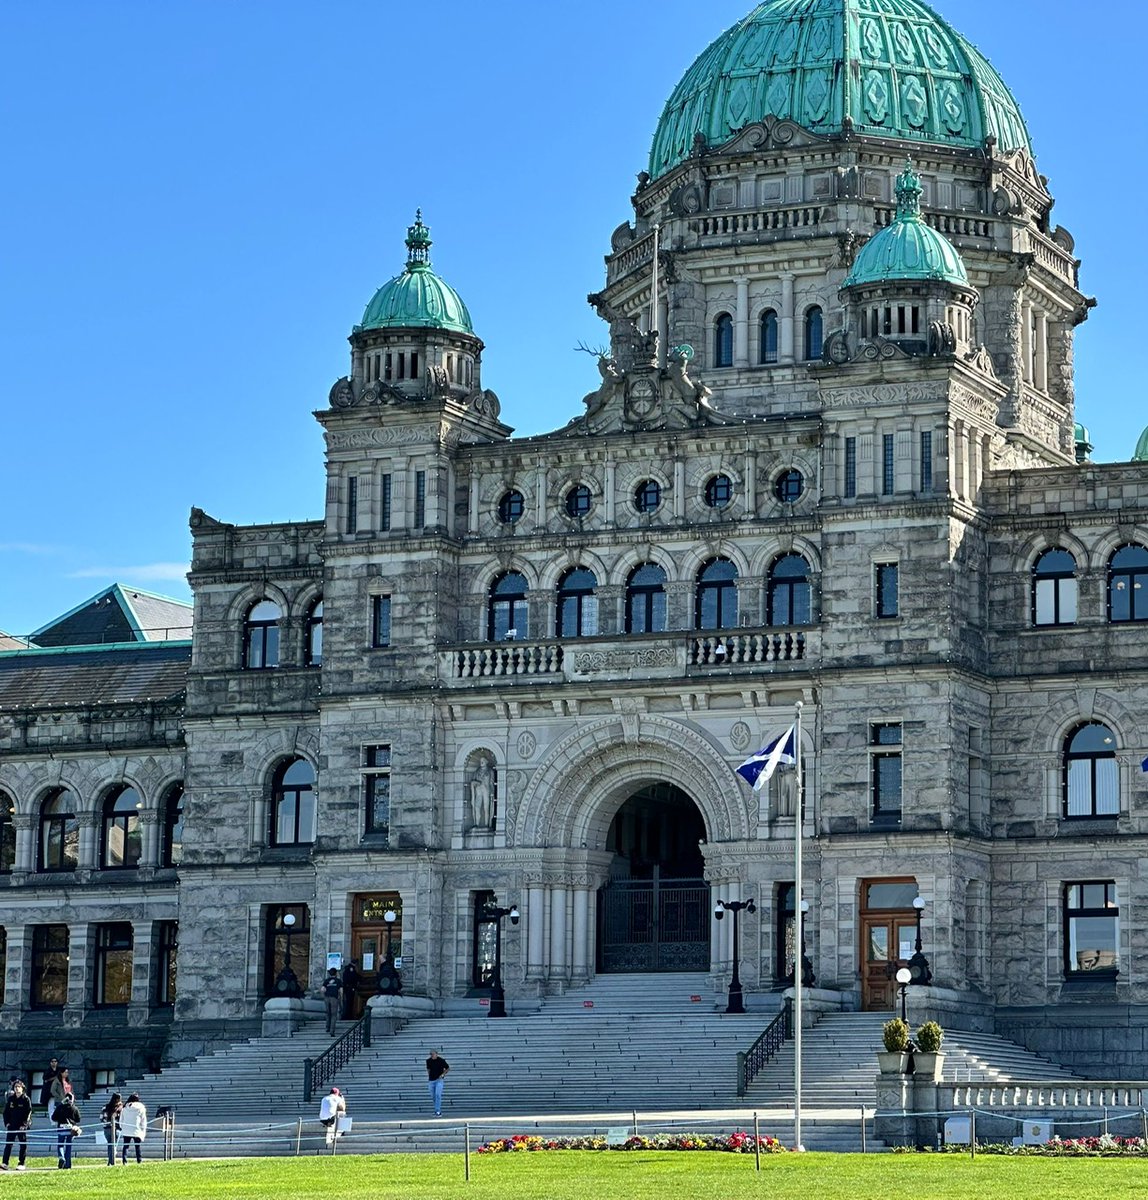 Thanks to @BCLegSpeaker, the Honourable Raj Chouhan, and Kate Ryan-Lloyd, Clerk of the Legislative Assembly, for the welcome to @BCLegislature and opportunity to learn and exchange experiences in wide-ranging discussions. @EvelynTweedSNP @mgoldenmsp @michaeljmarra